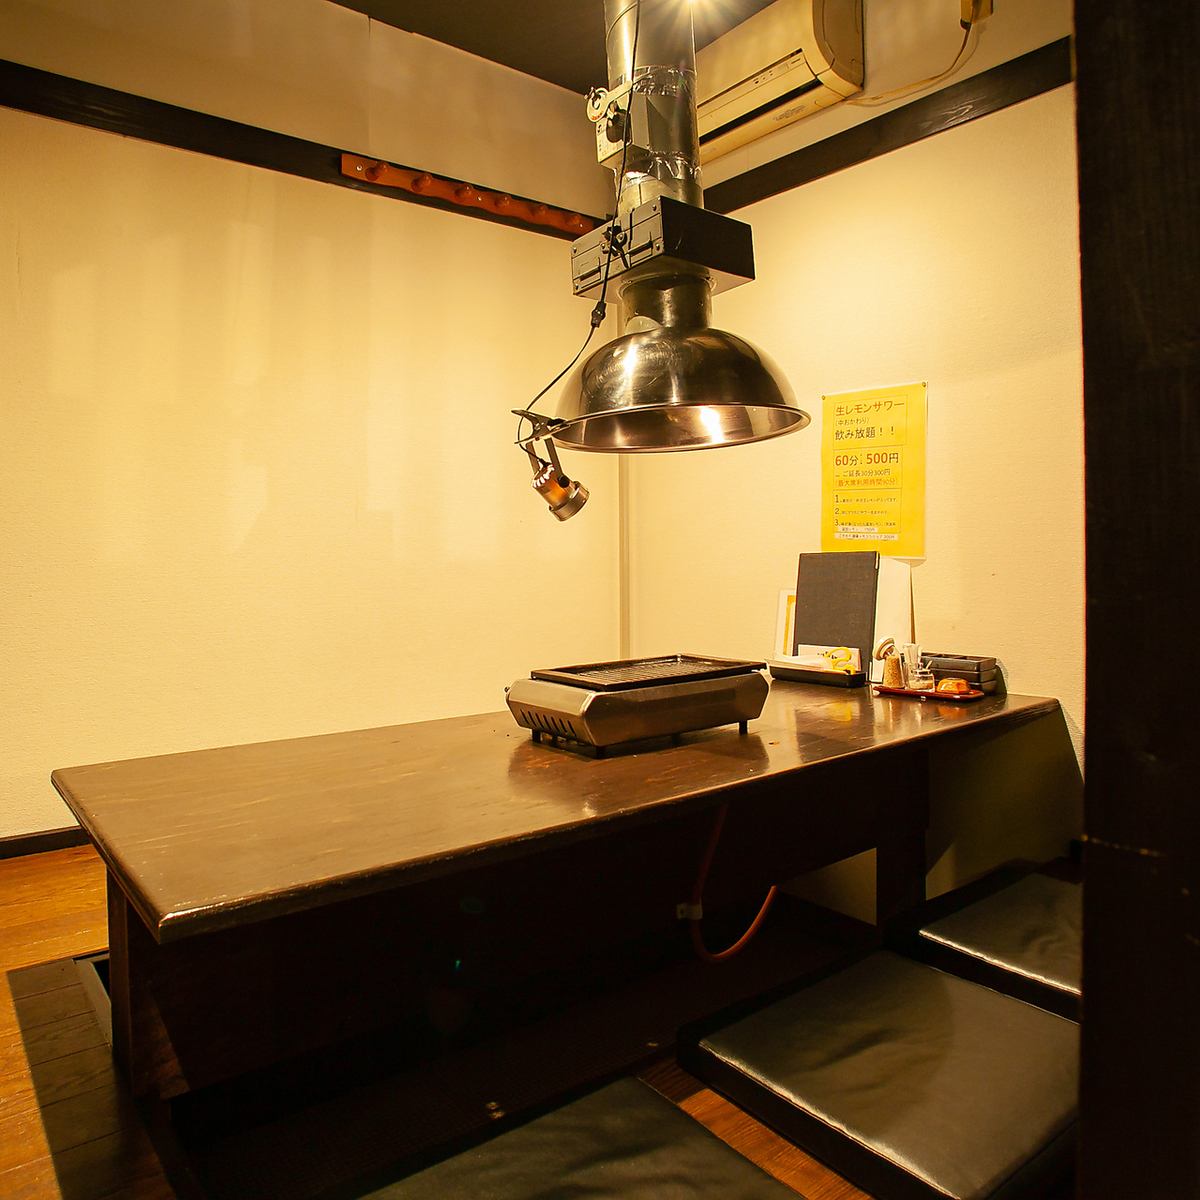 Beef SUKE has a private room for 5 to 6 people ♪ You can use it according to the situation